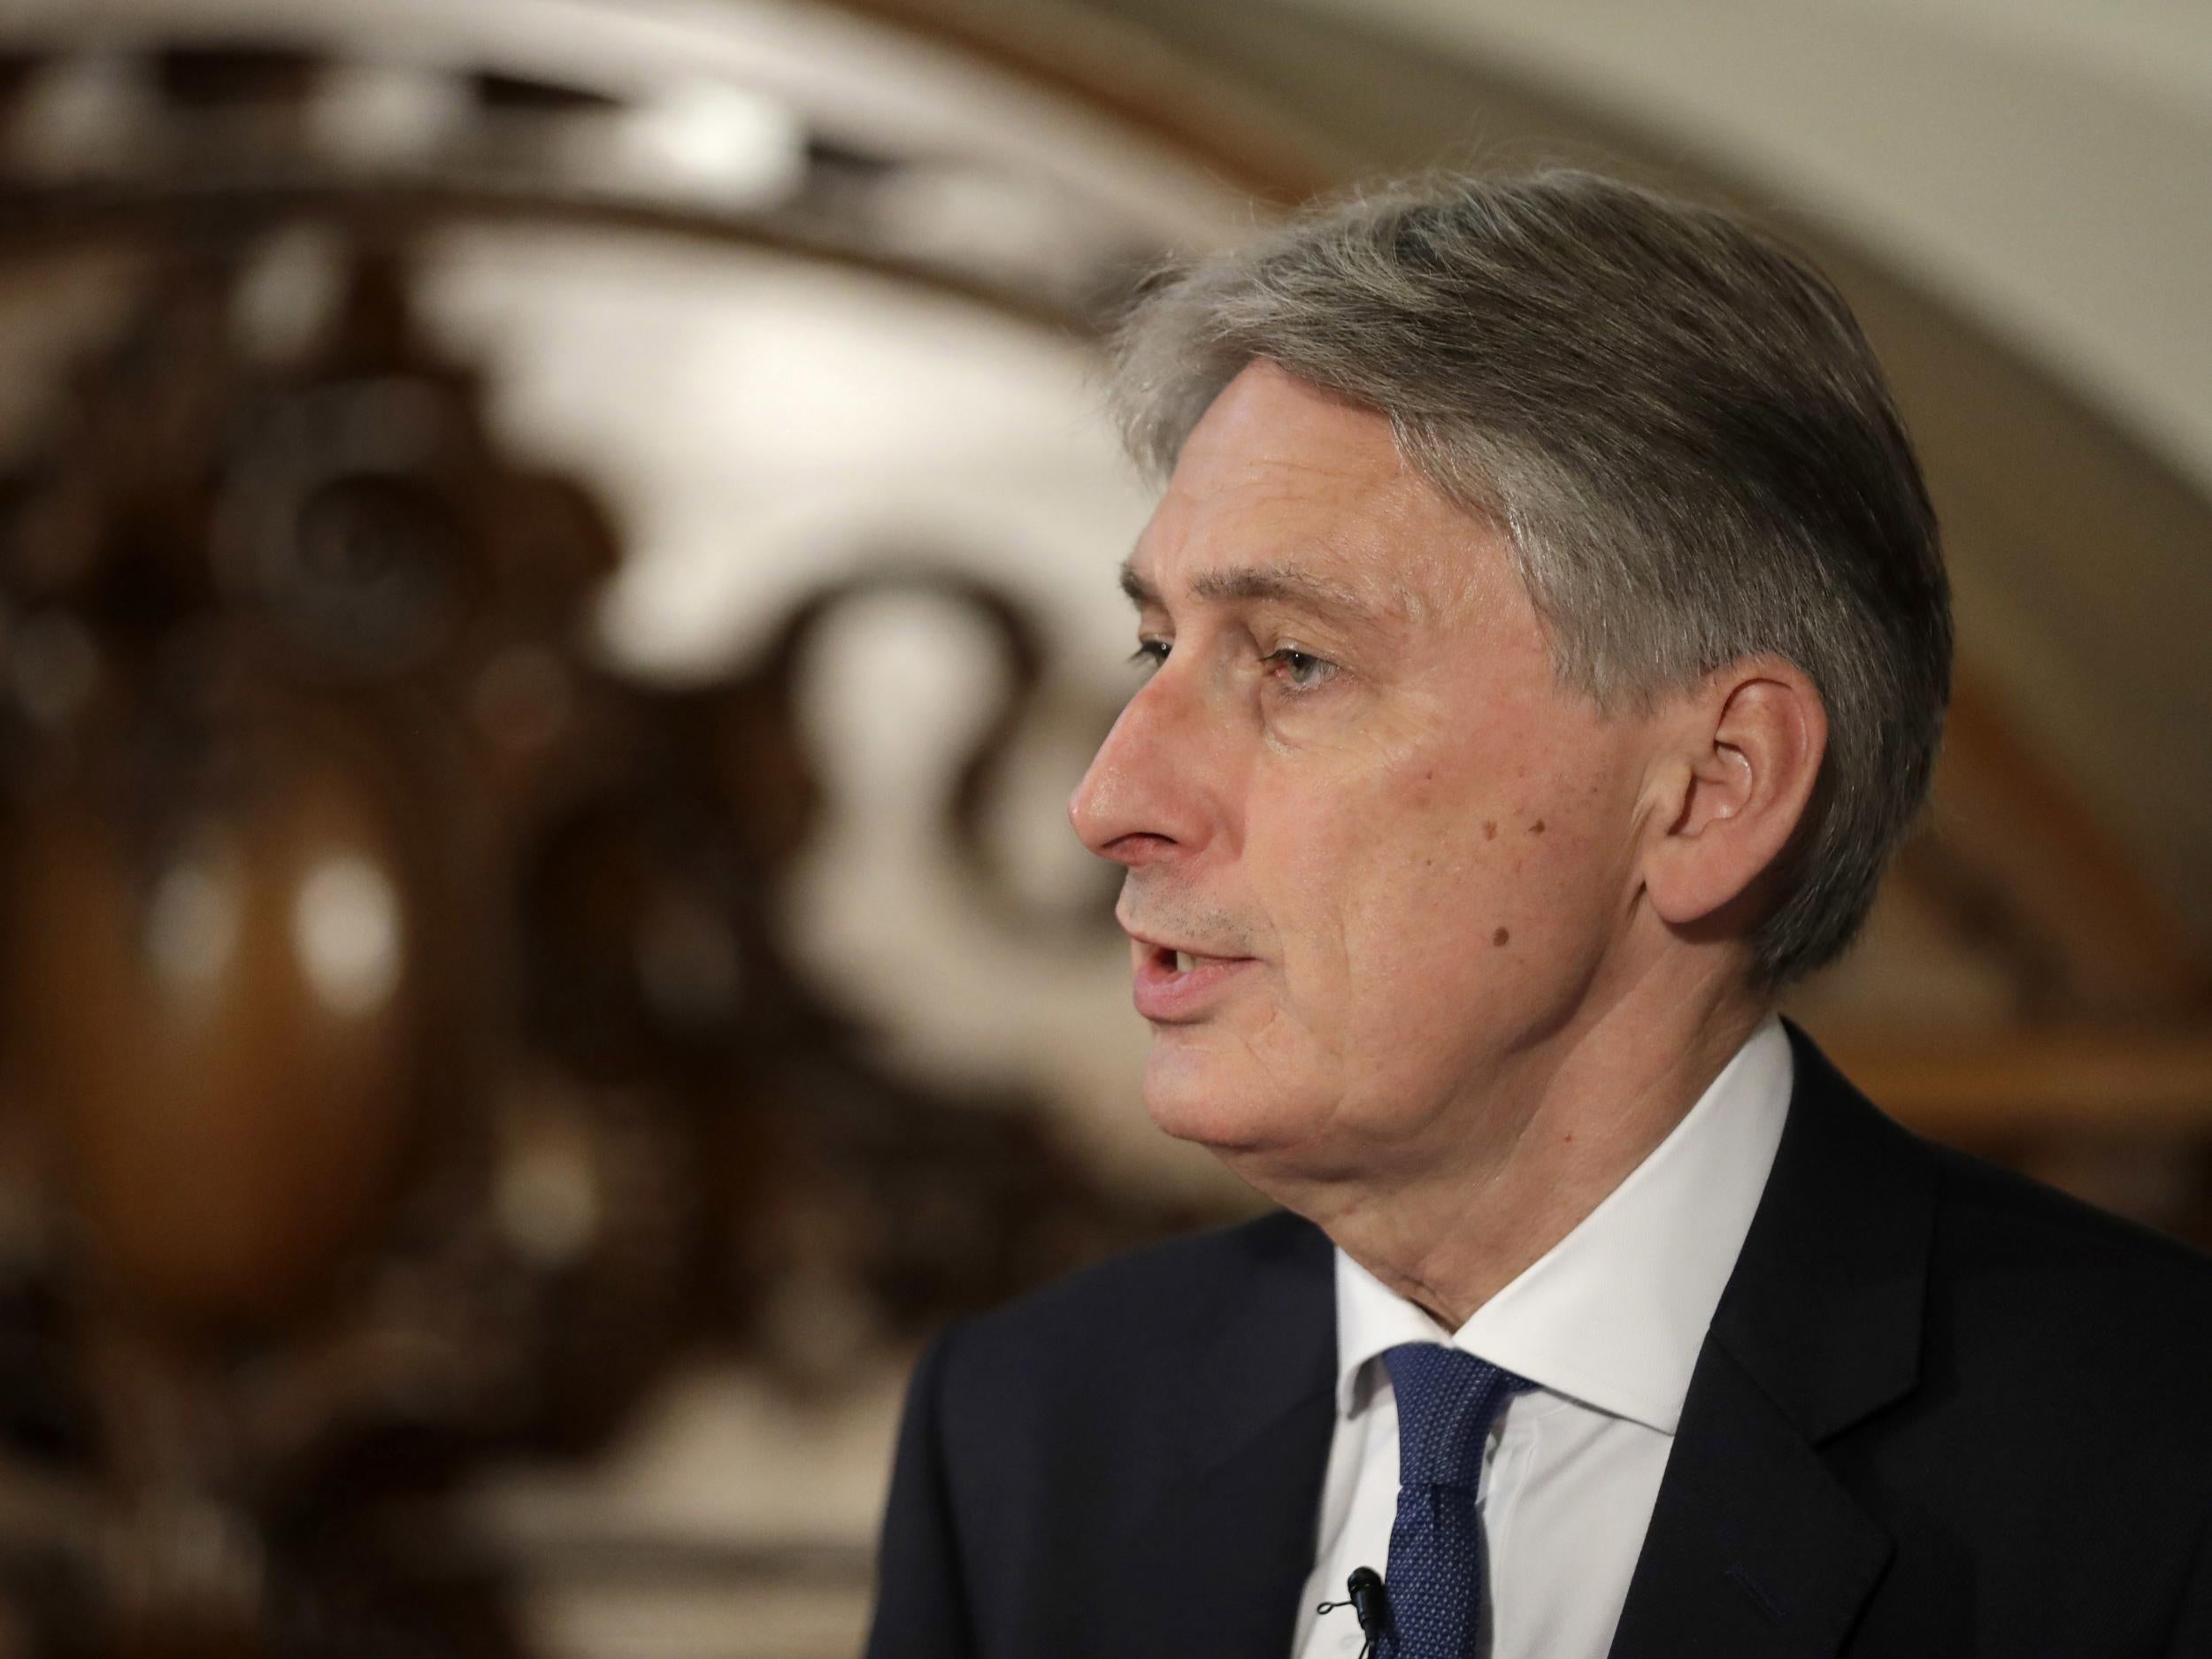 The Chancellor wants to make housing and NHS pay his key priorities